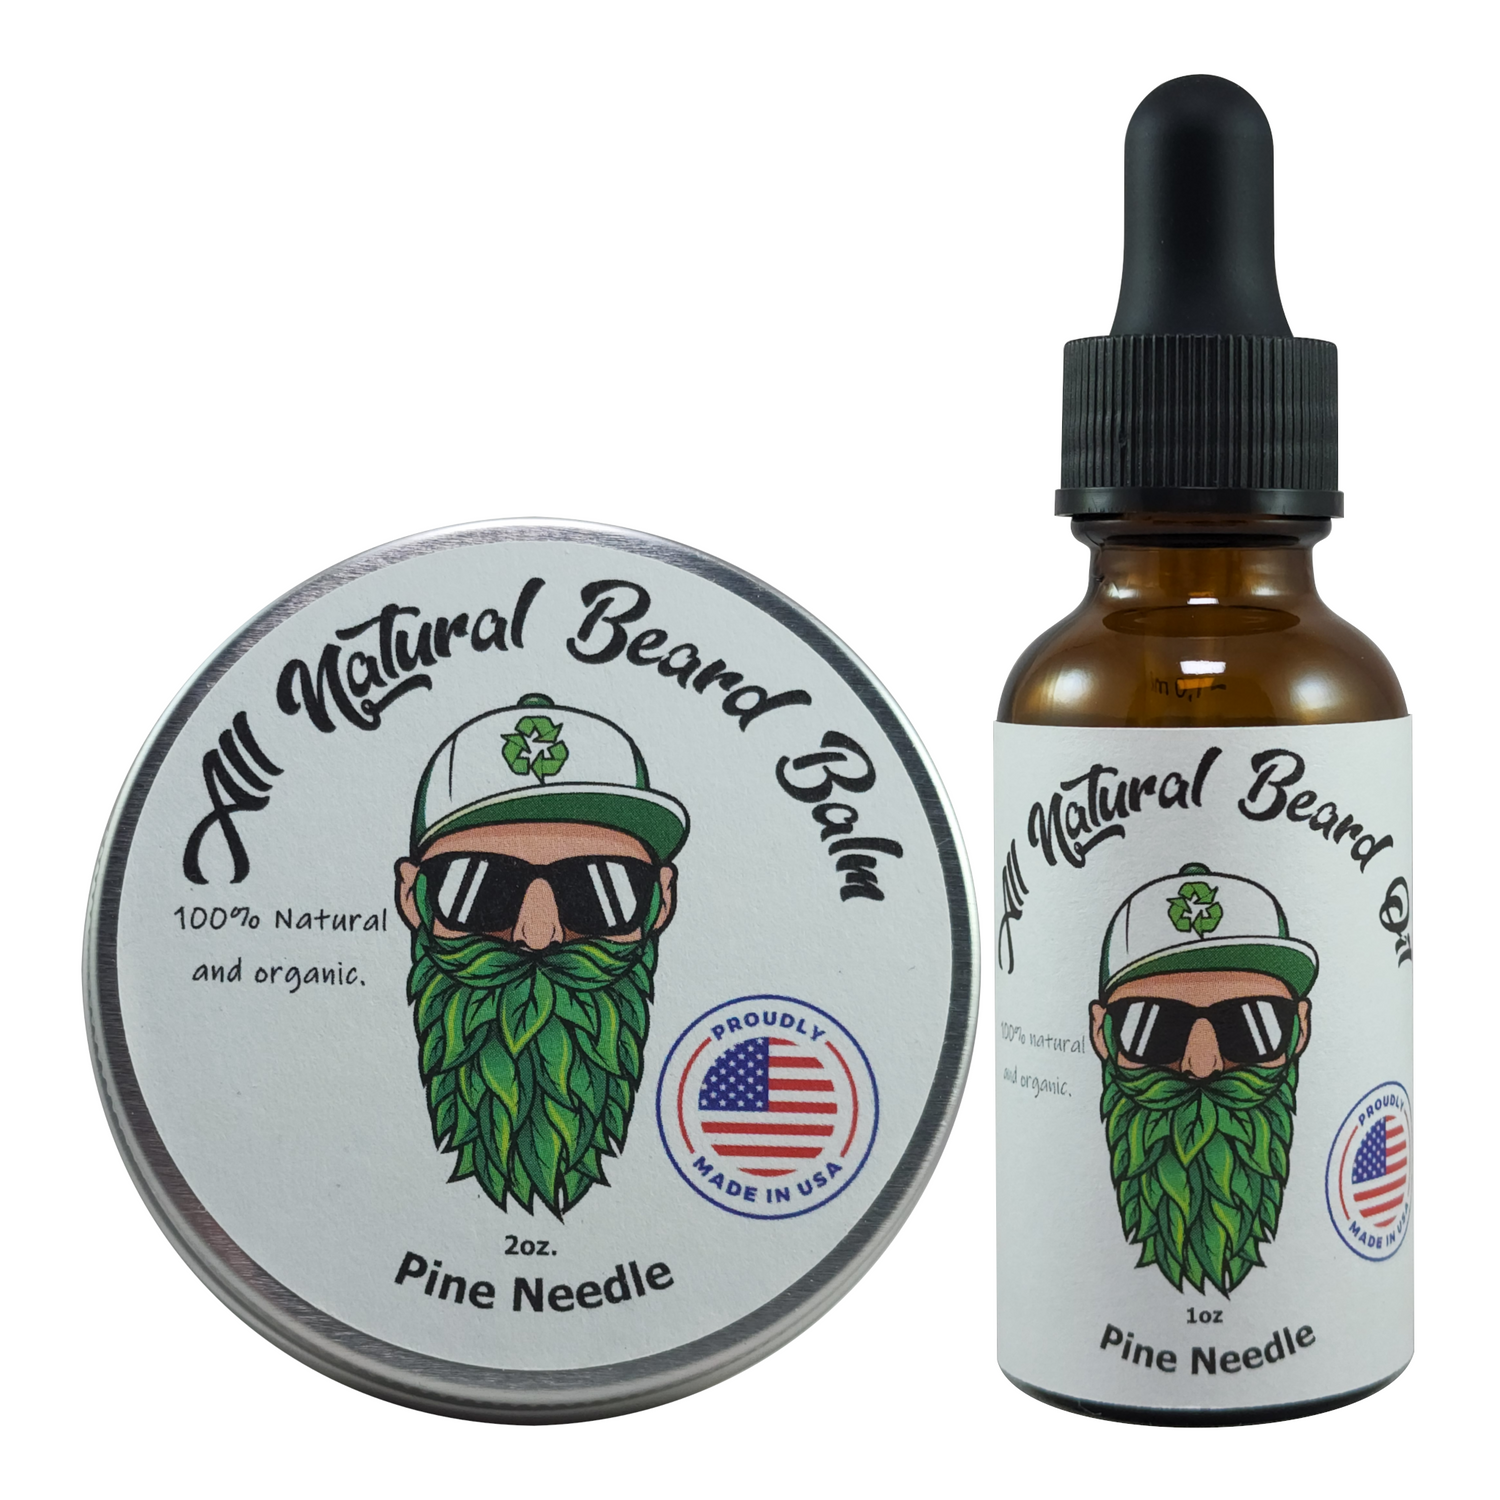 All Natural Beard Balm and Oil Combo